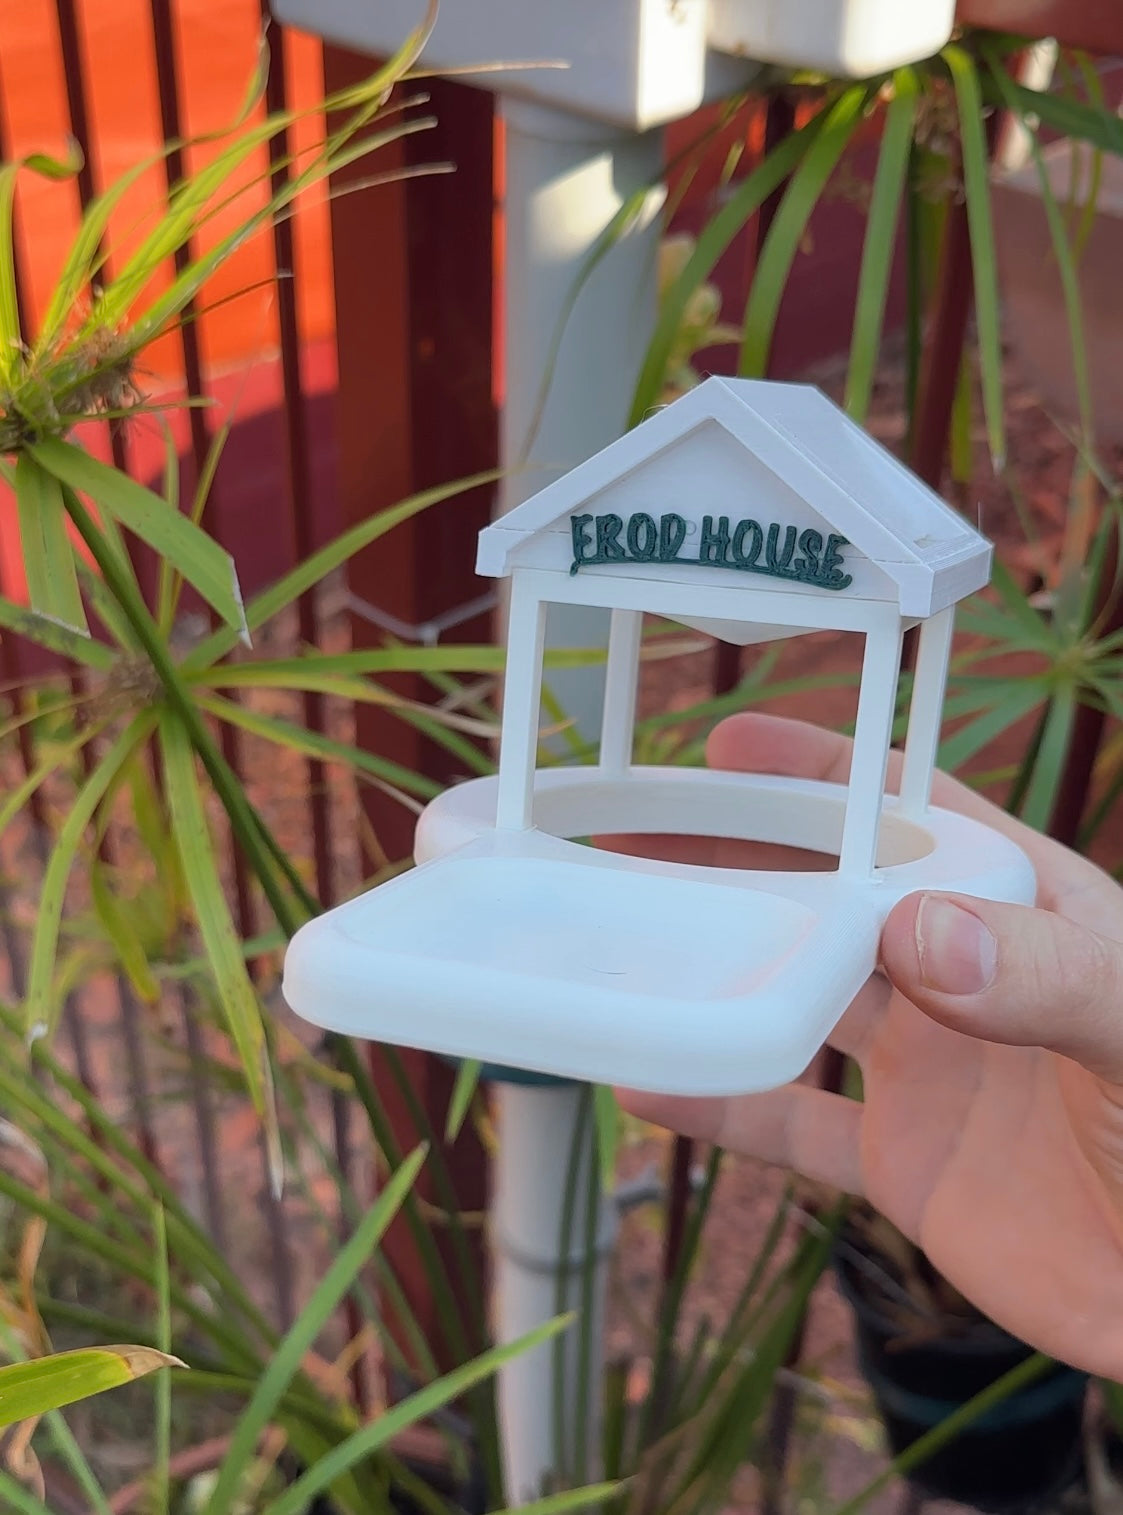 Frod House Fence Topper (Frog House)